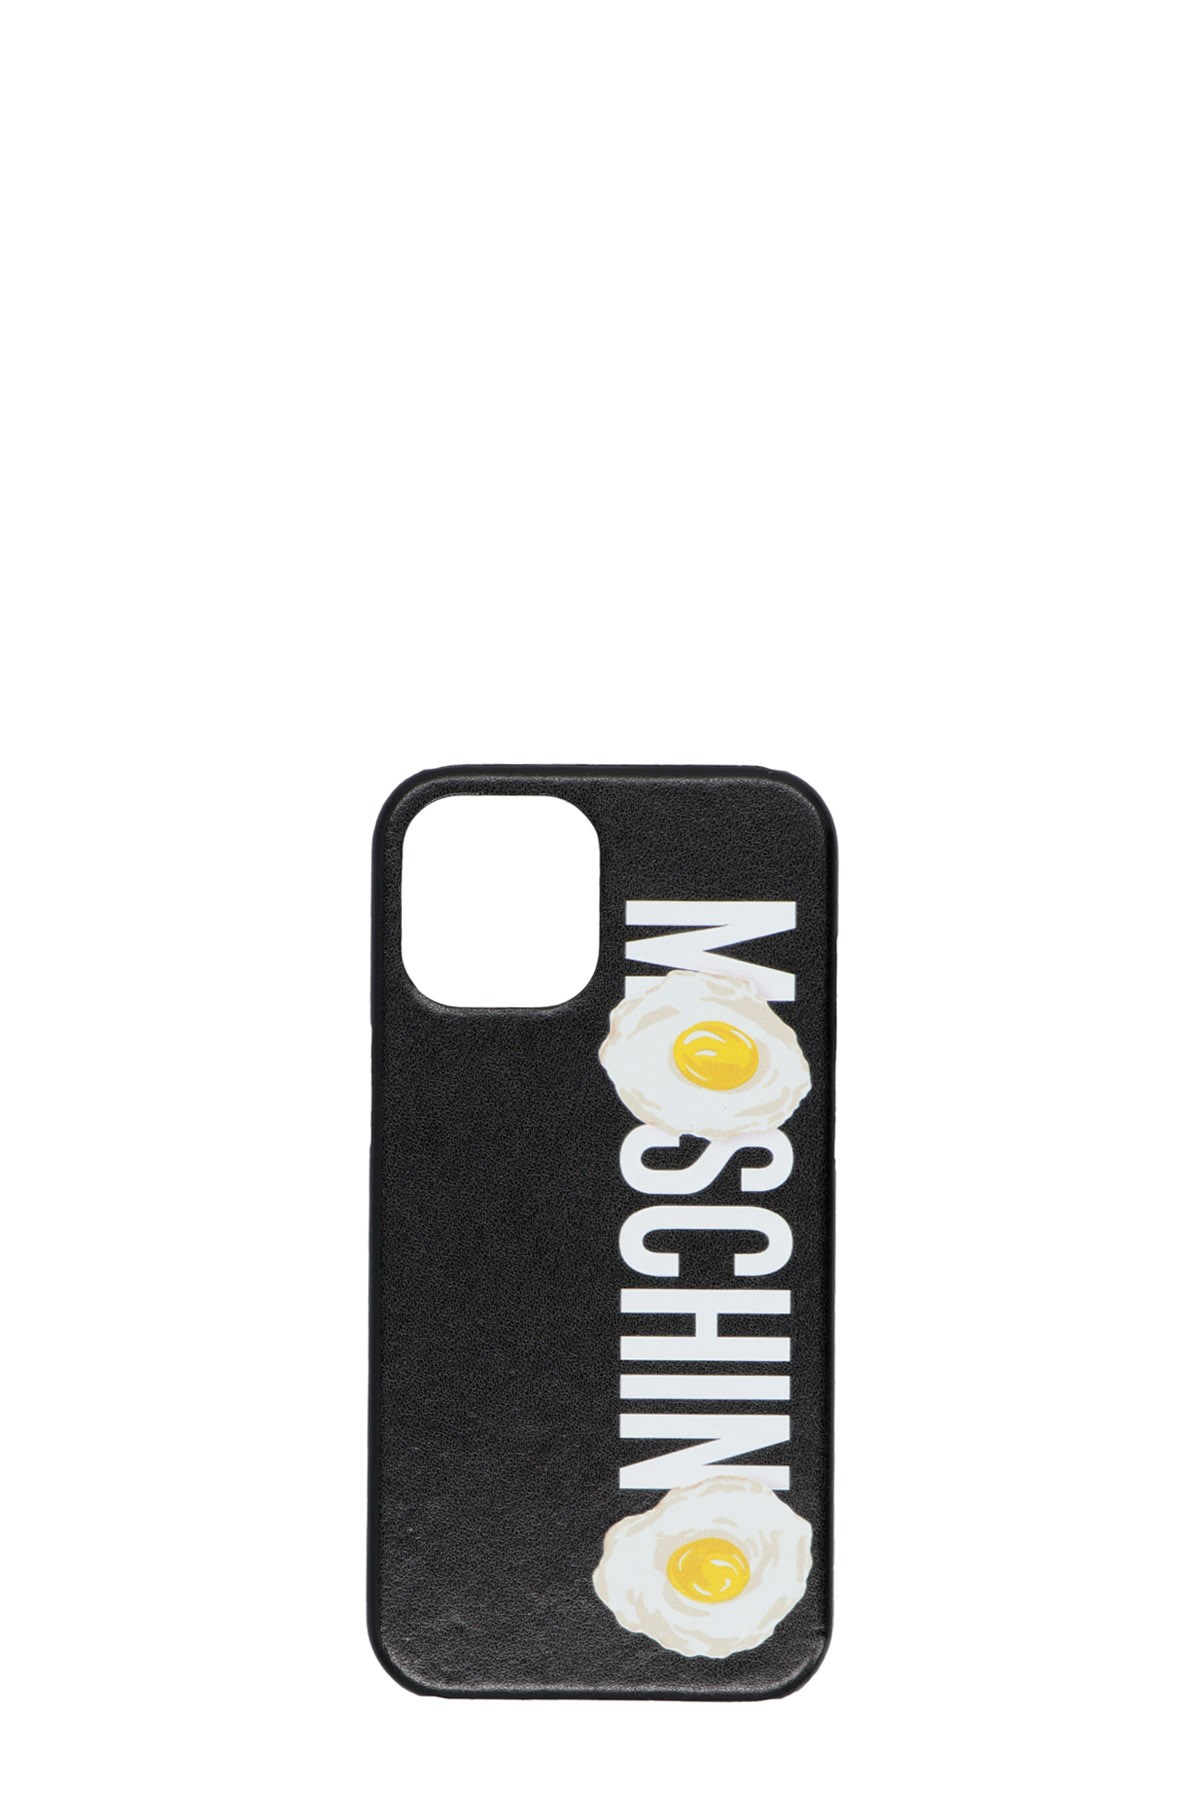 MOSCHINO Iphone 12 Pro Max Logo Cover